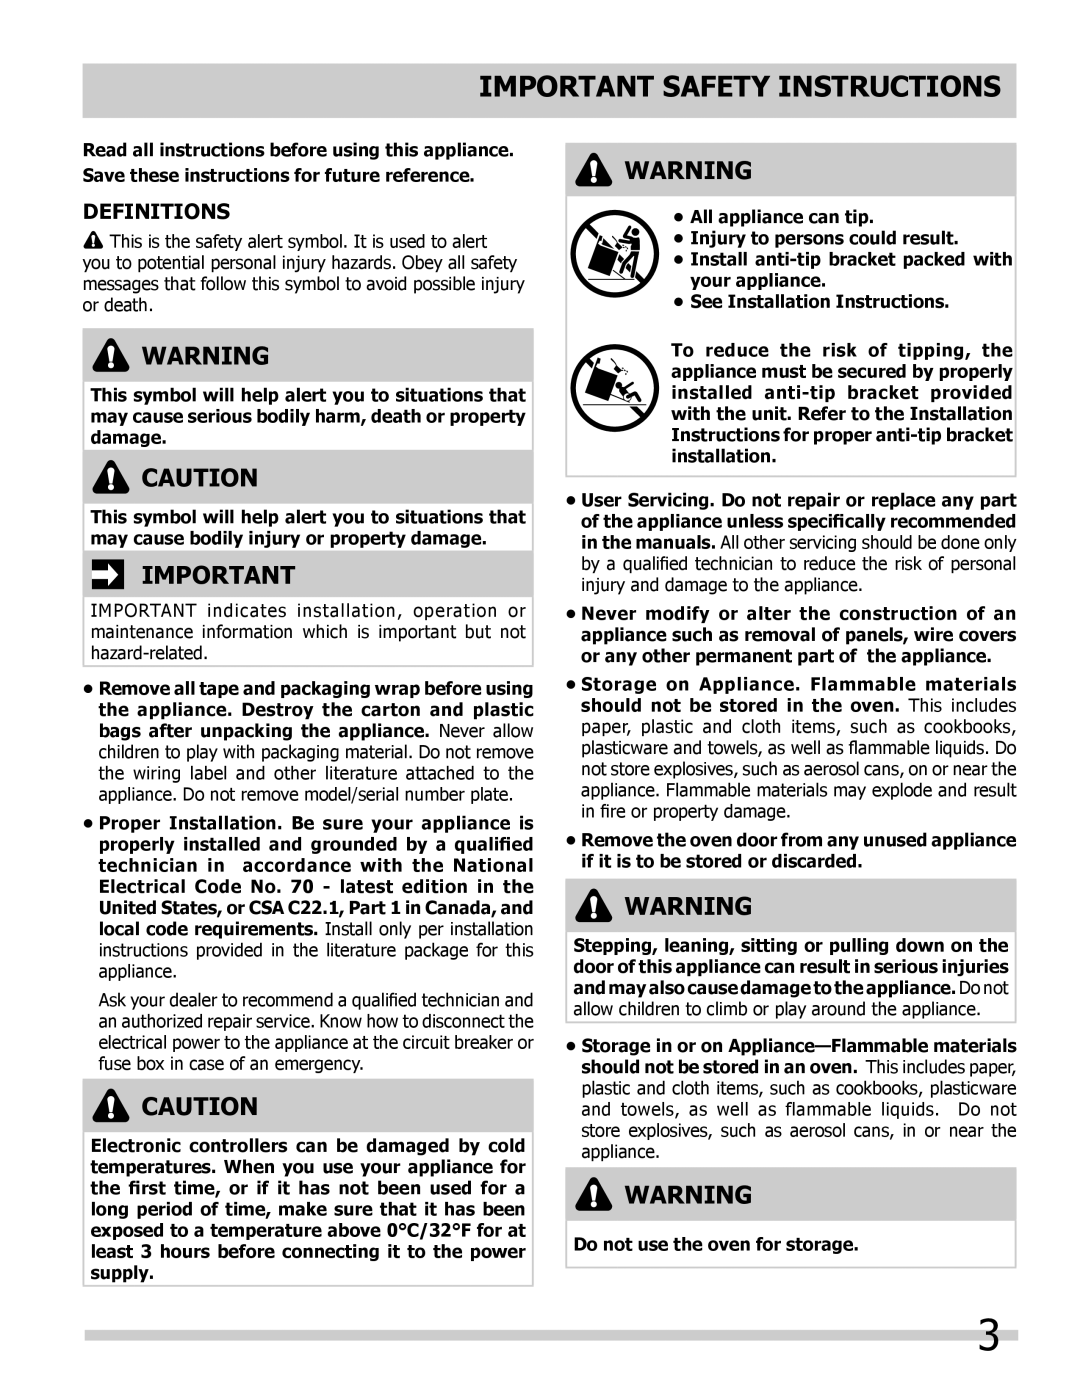 Frigidaire 318205325 Important Safety Instructions, Definitions, Electrical Code No. 70 - latest edition in the 